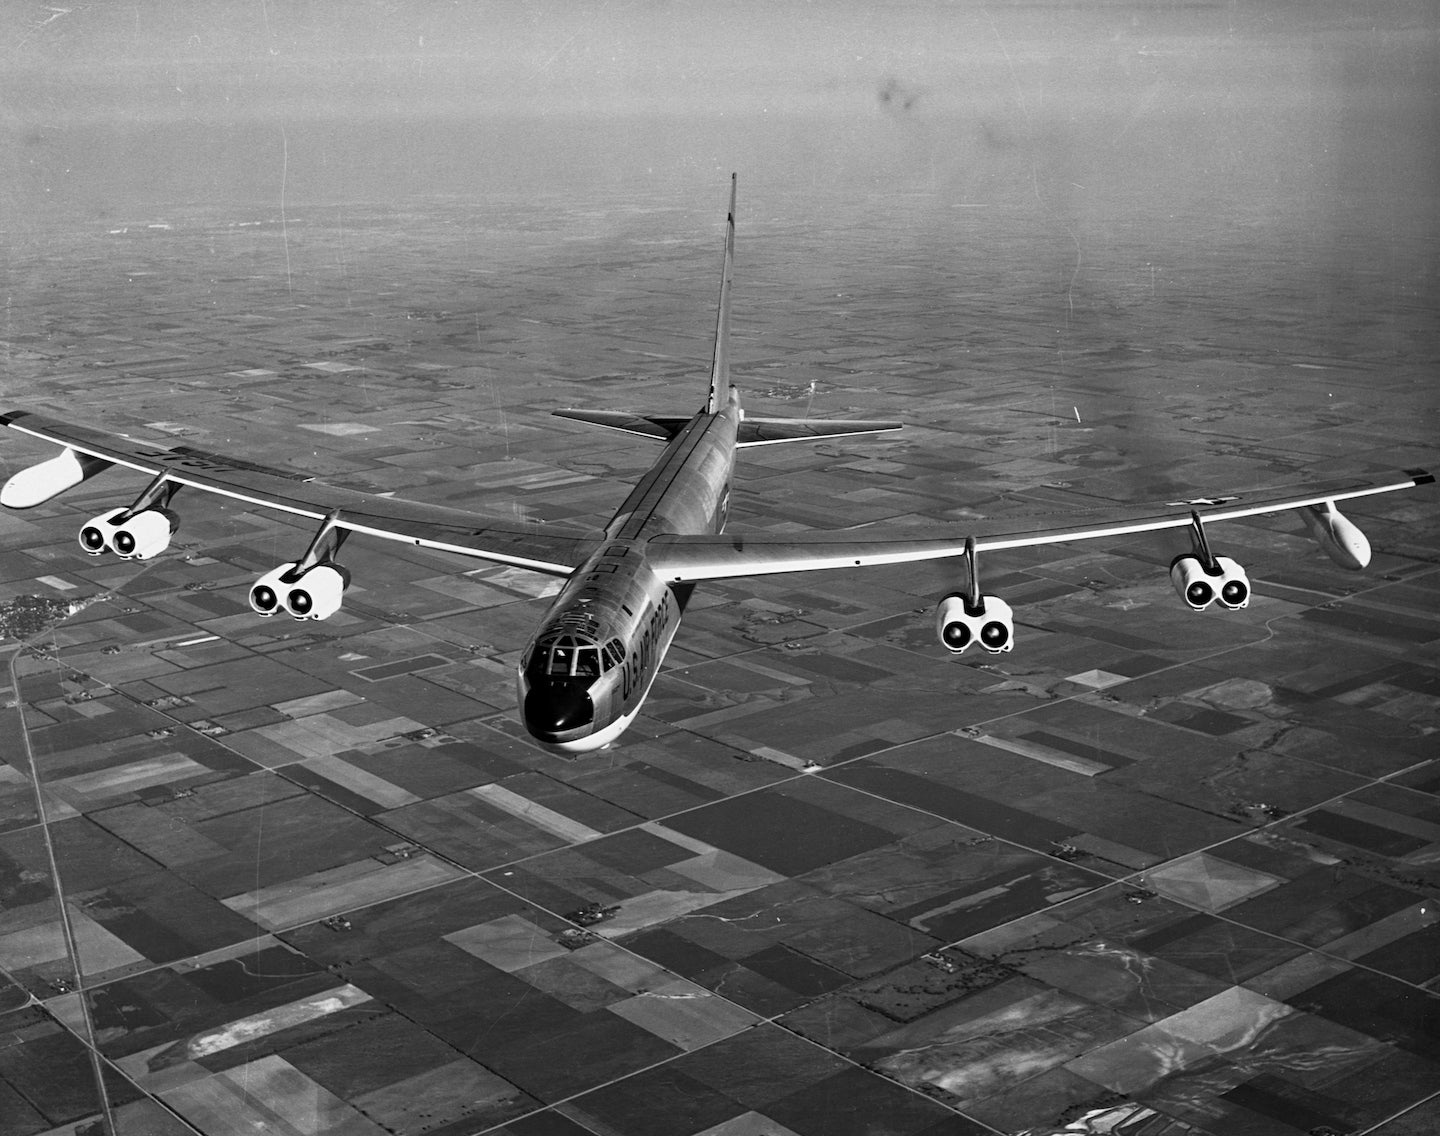 During a photo flight in 1958, a Boeing B-52 Stratofortress bomber flies over the farmland of the midwestern United States. | Location: Midwestern United States. (Photo by © Museum of Flight/CORBIS/Corbis via Getty Images)